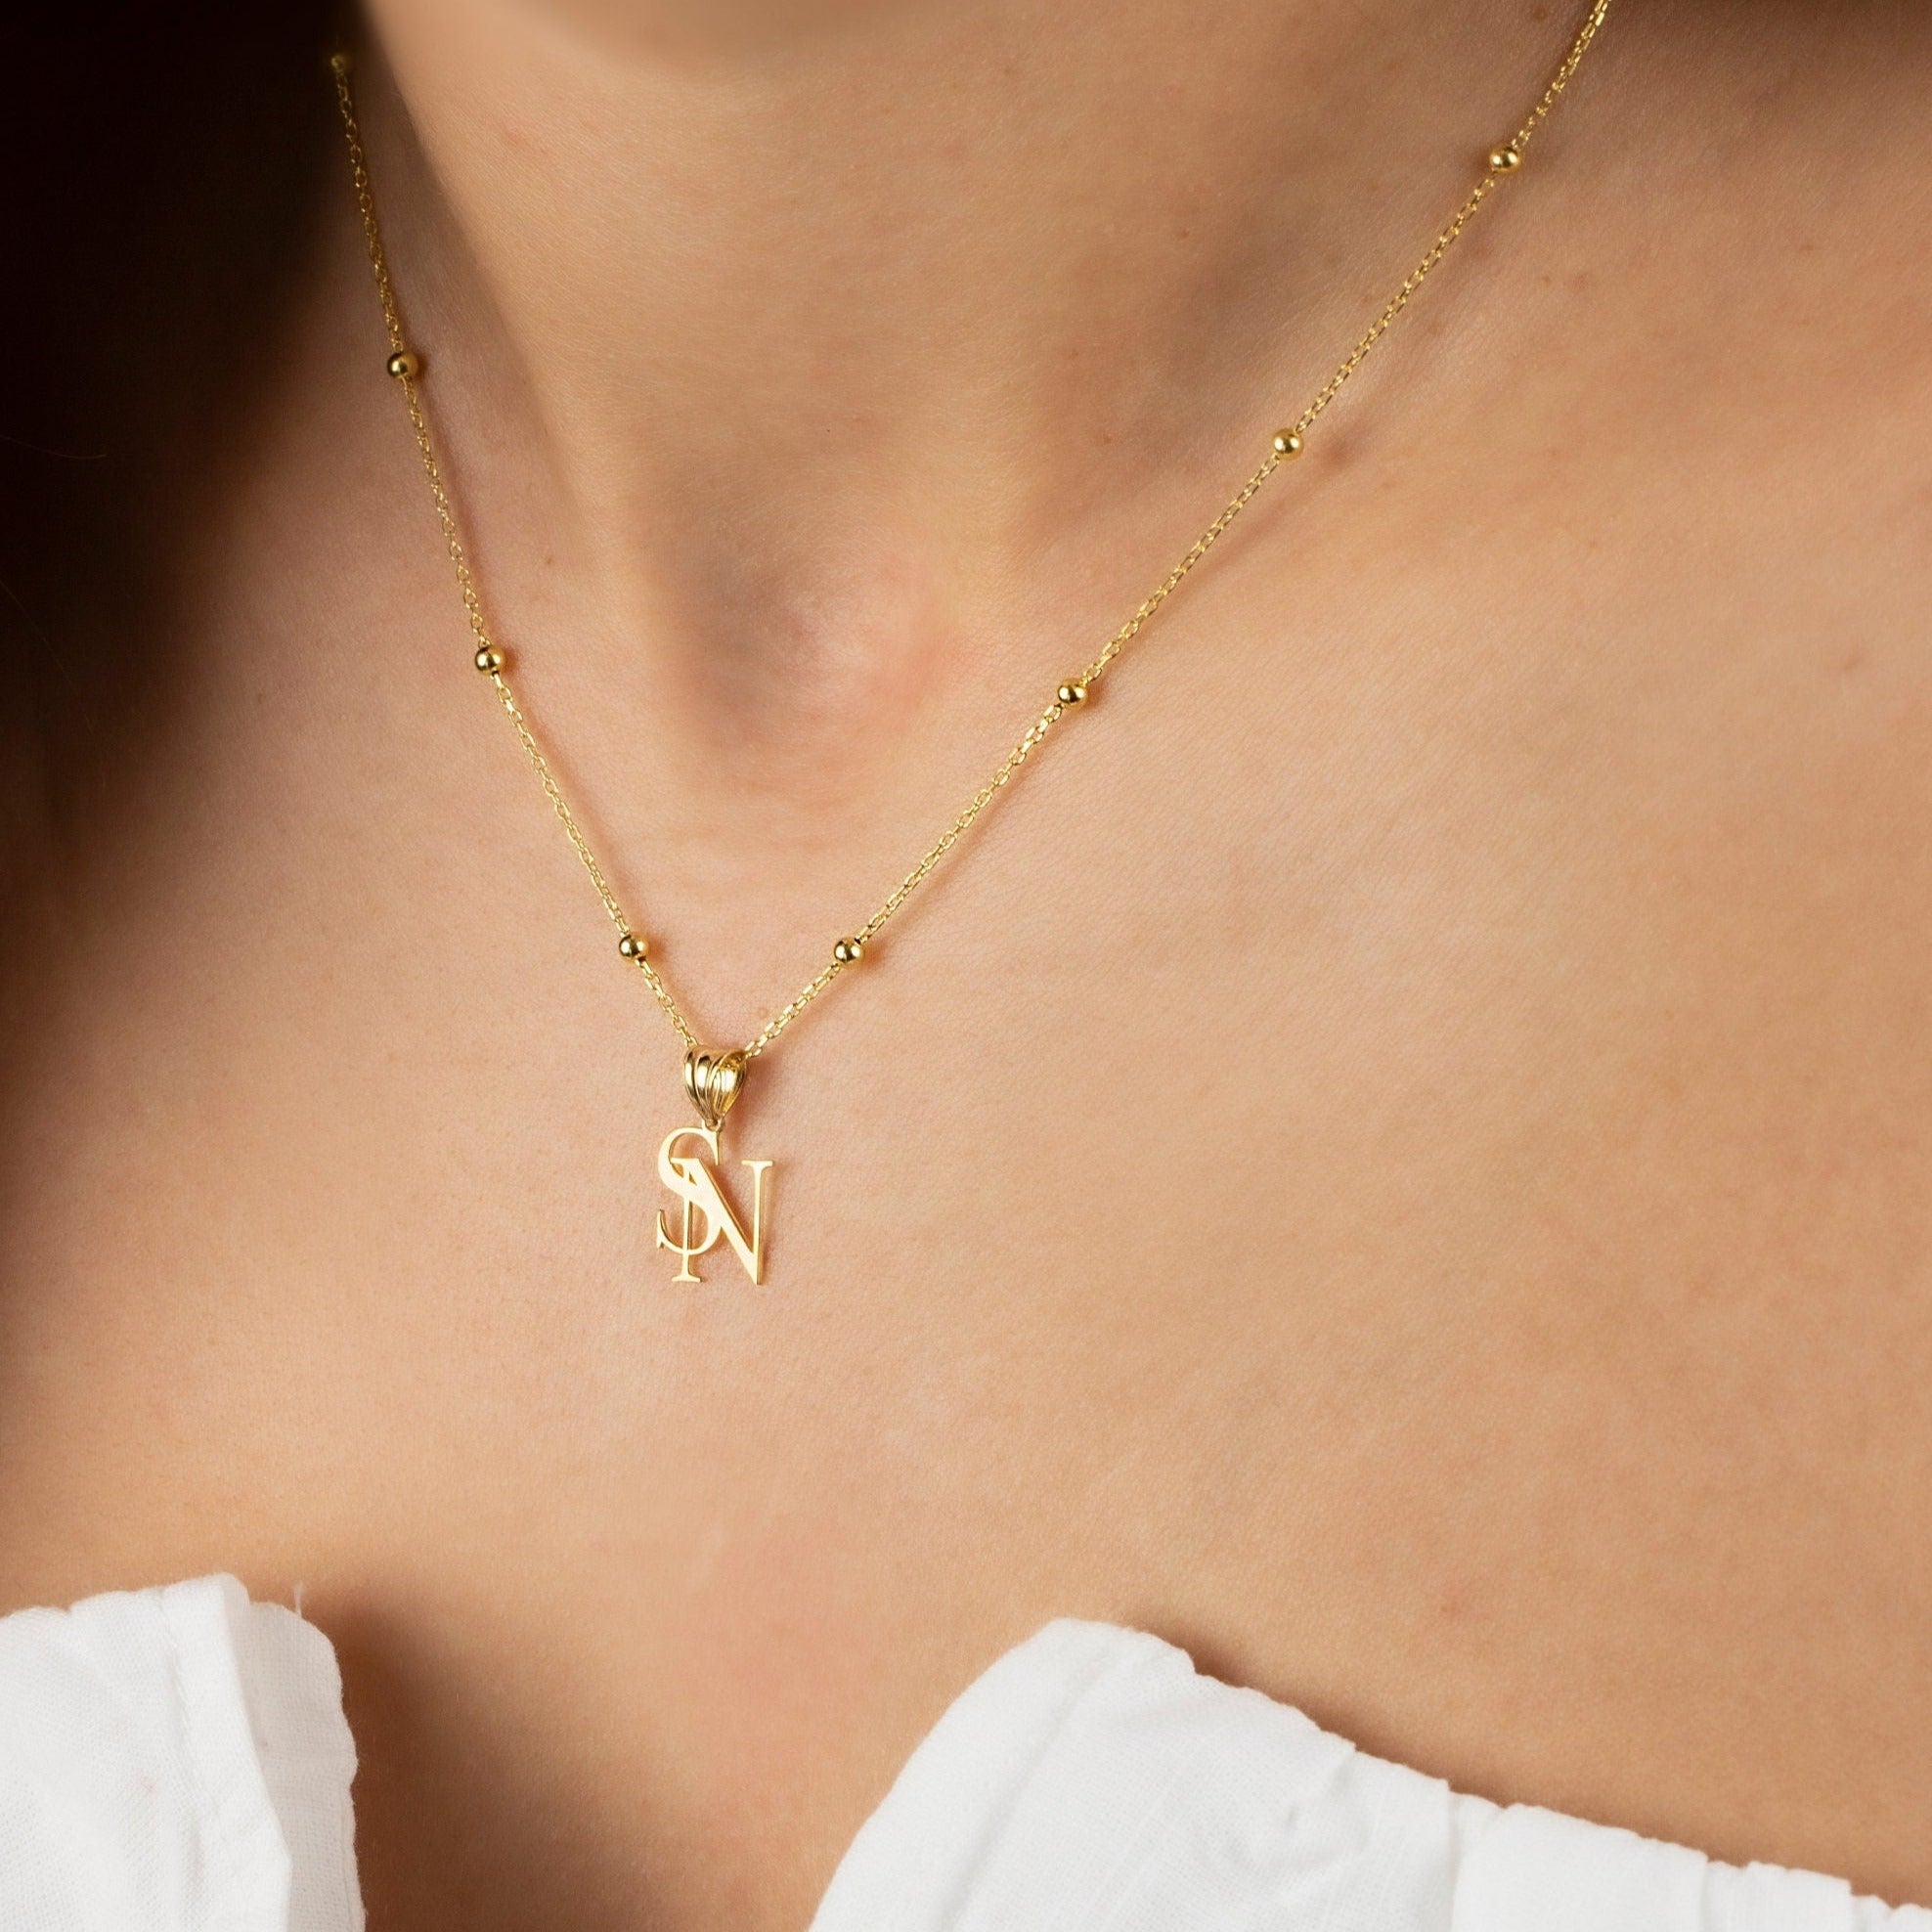 Two Initials Necklace, Double Letters Pendant , Mothers Necklace , Gold  Initials Necklace , Personalized Mothers Day Gift , Gift for Her - Etsy |  Gold initial pendant, Initial necklace, Locket design